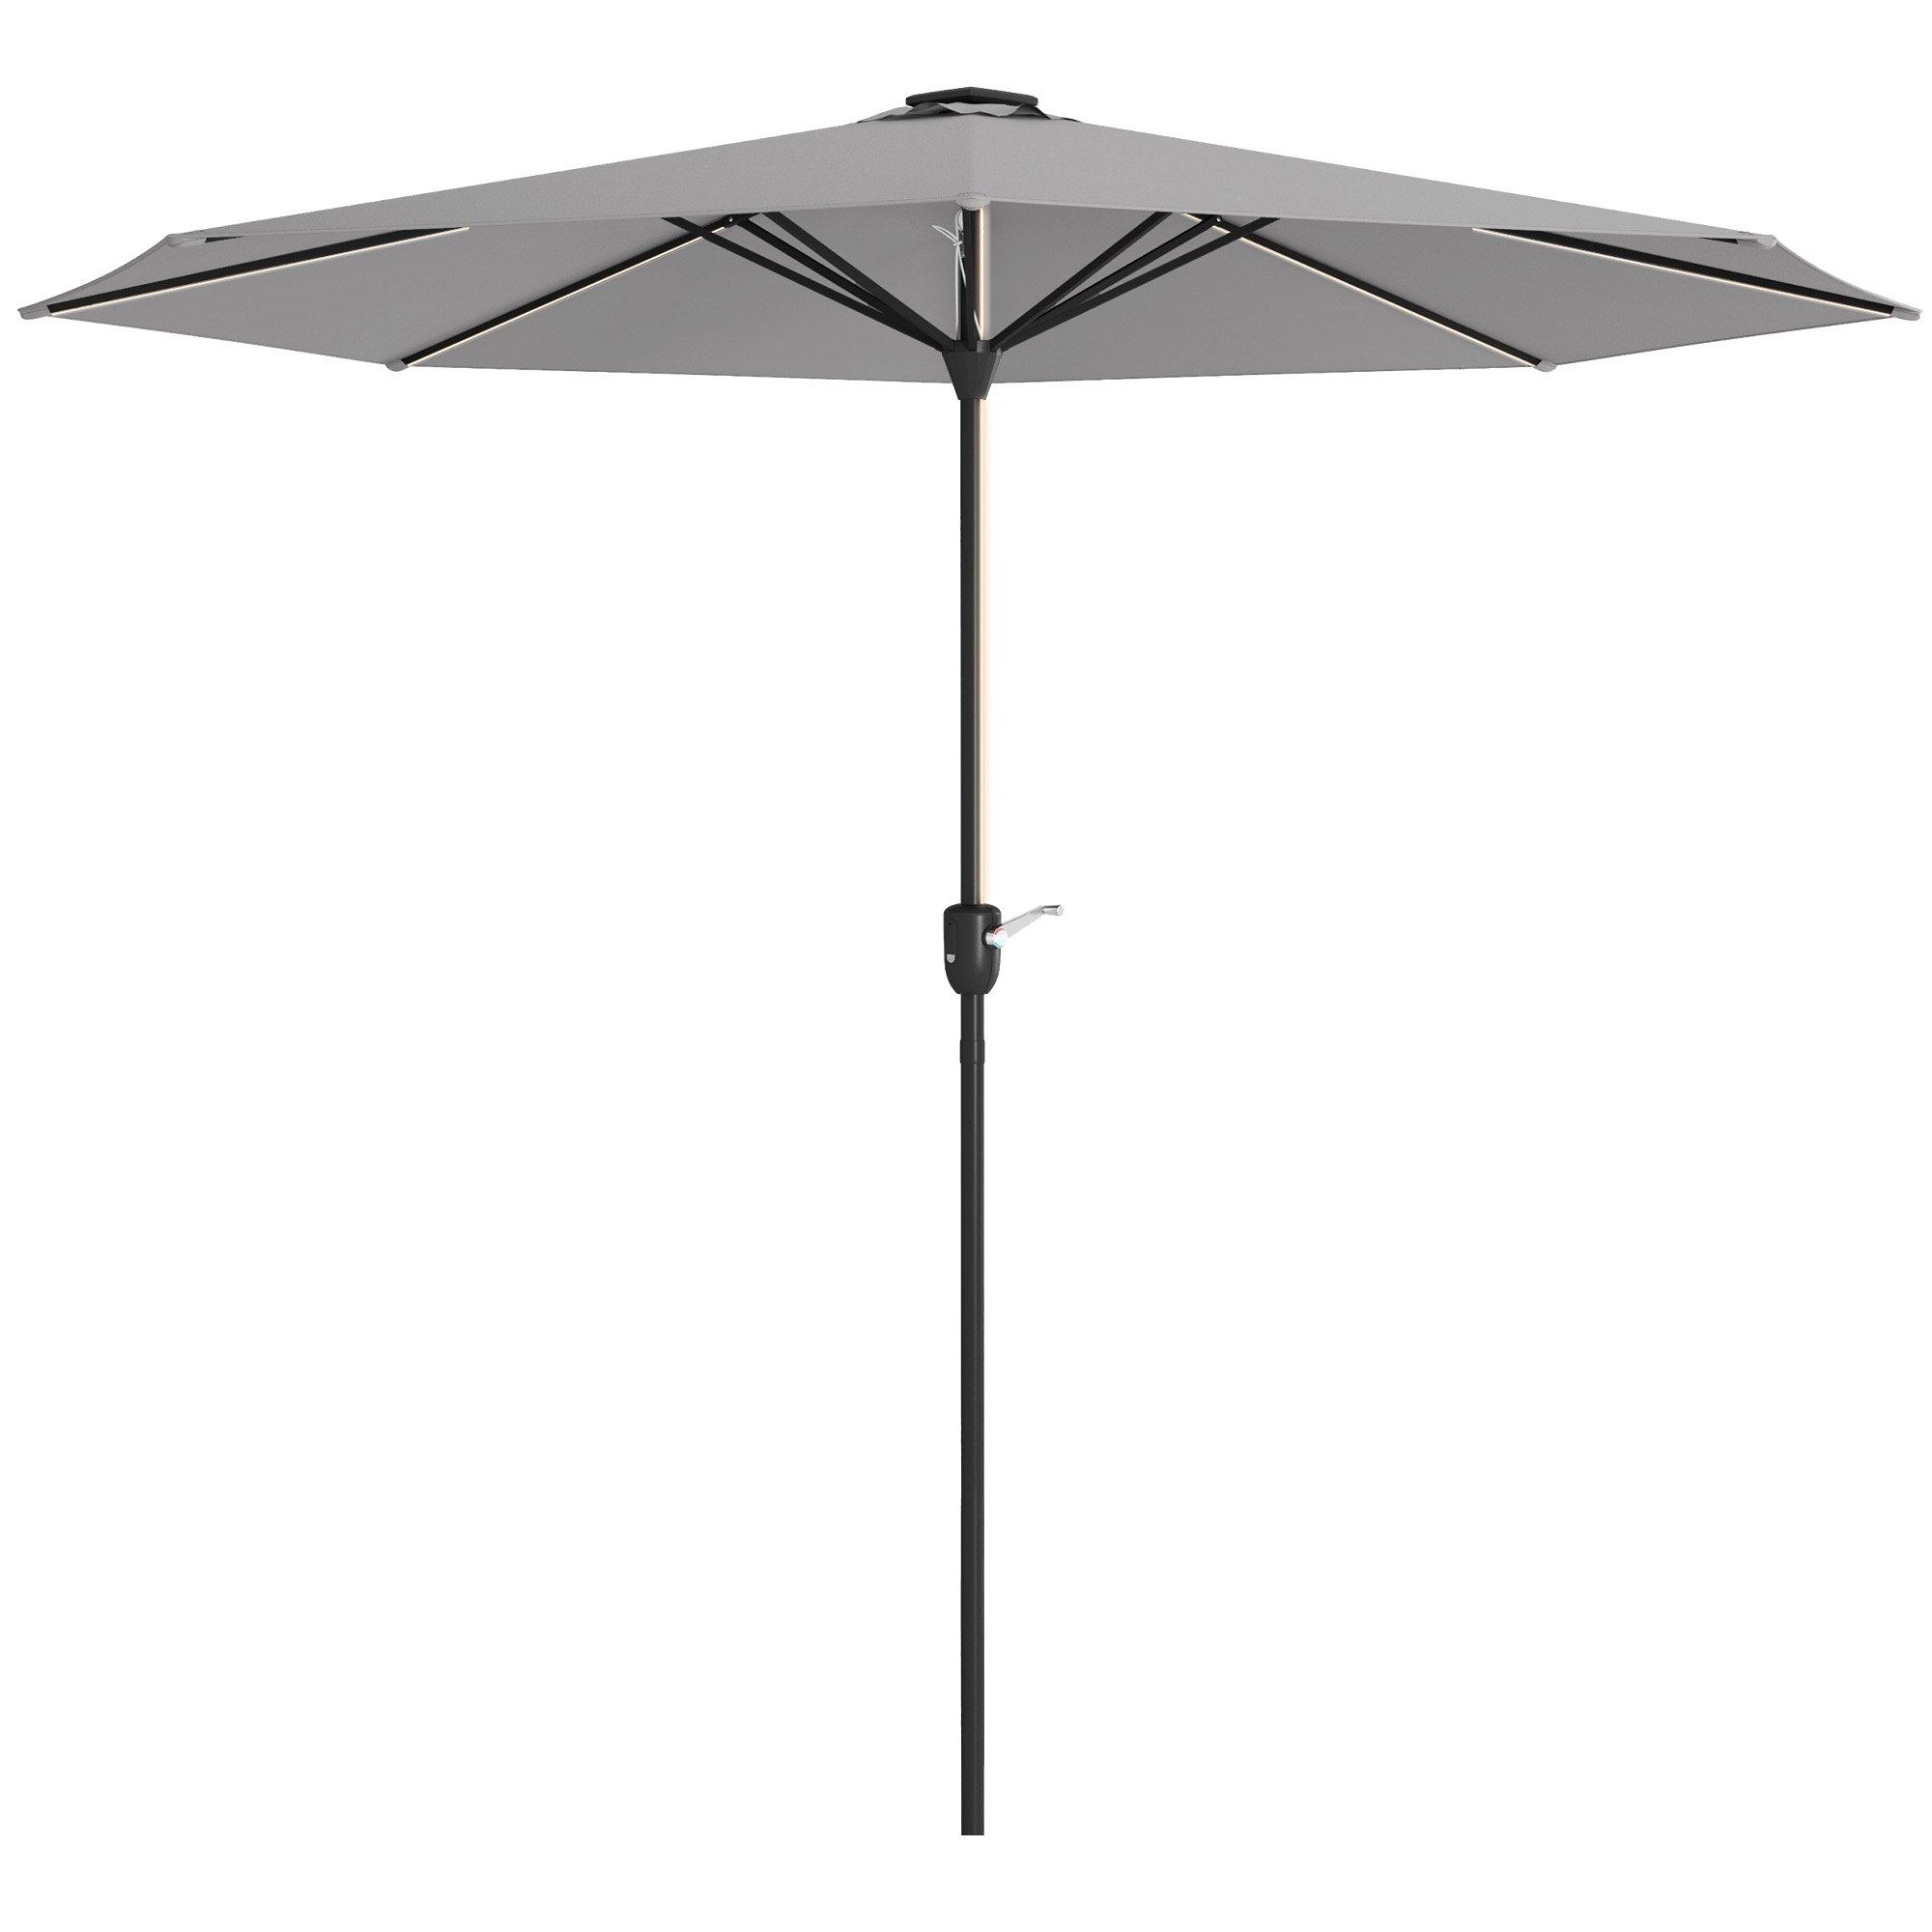 2.65m Garden Parasol with Solar Charged LED Lights, Crank Handle